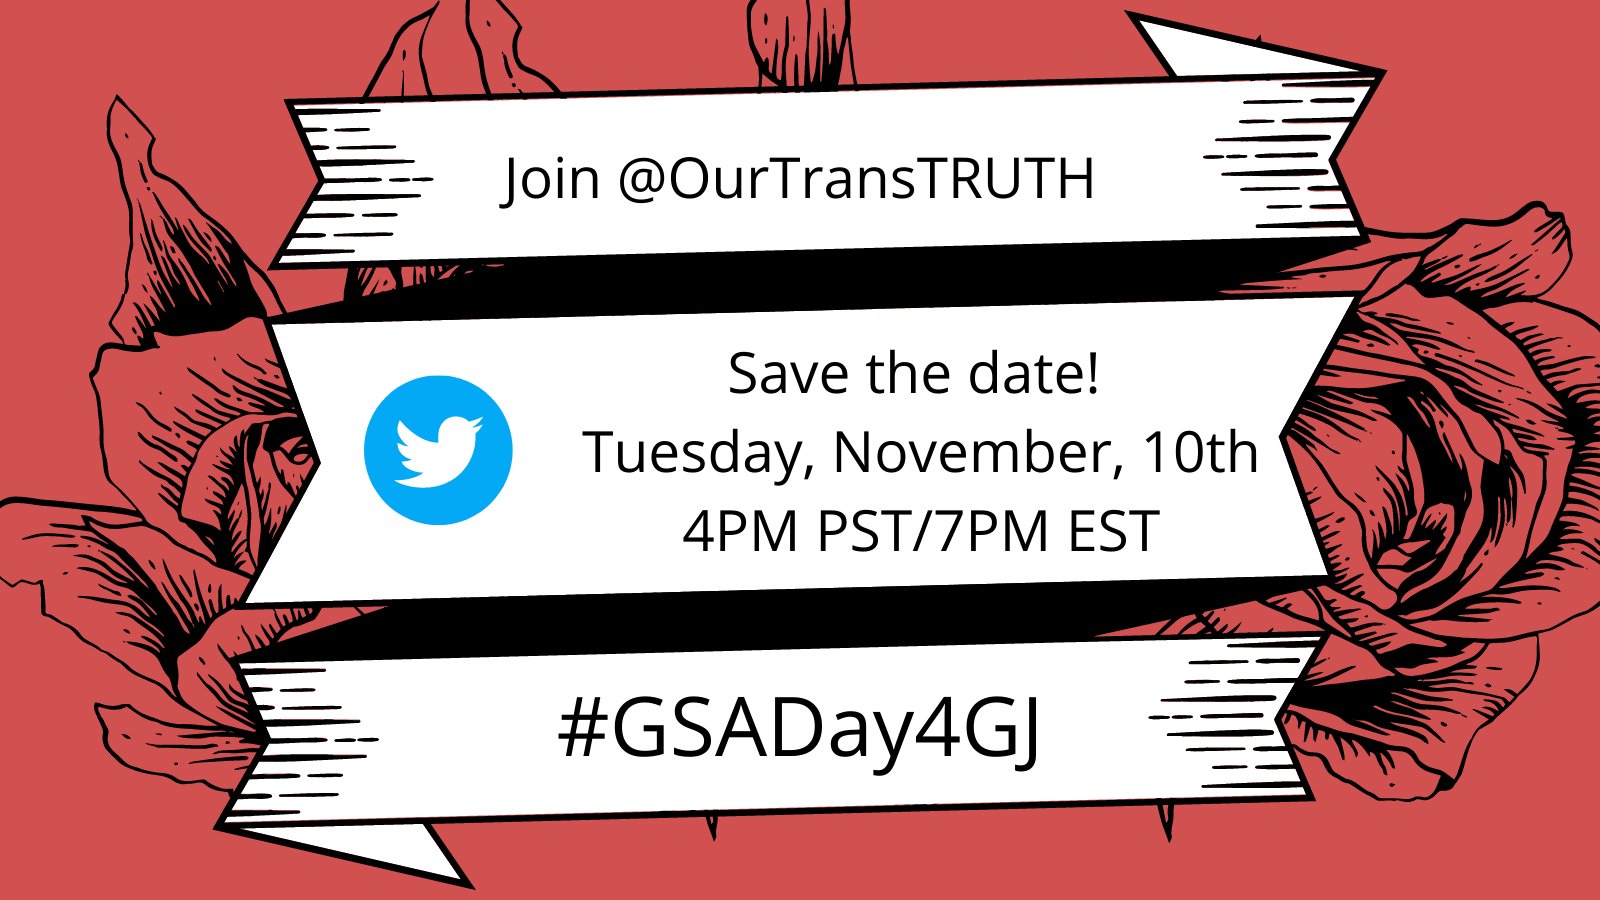 Join @OurTransTRUTH | Save the date! Tuesday, November 10, 4 PM PST / 7PM EST | #GSADay4GJ